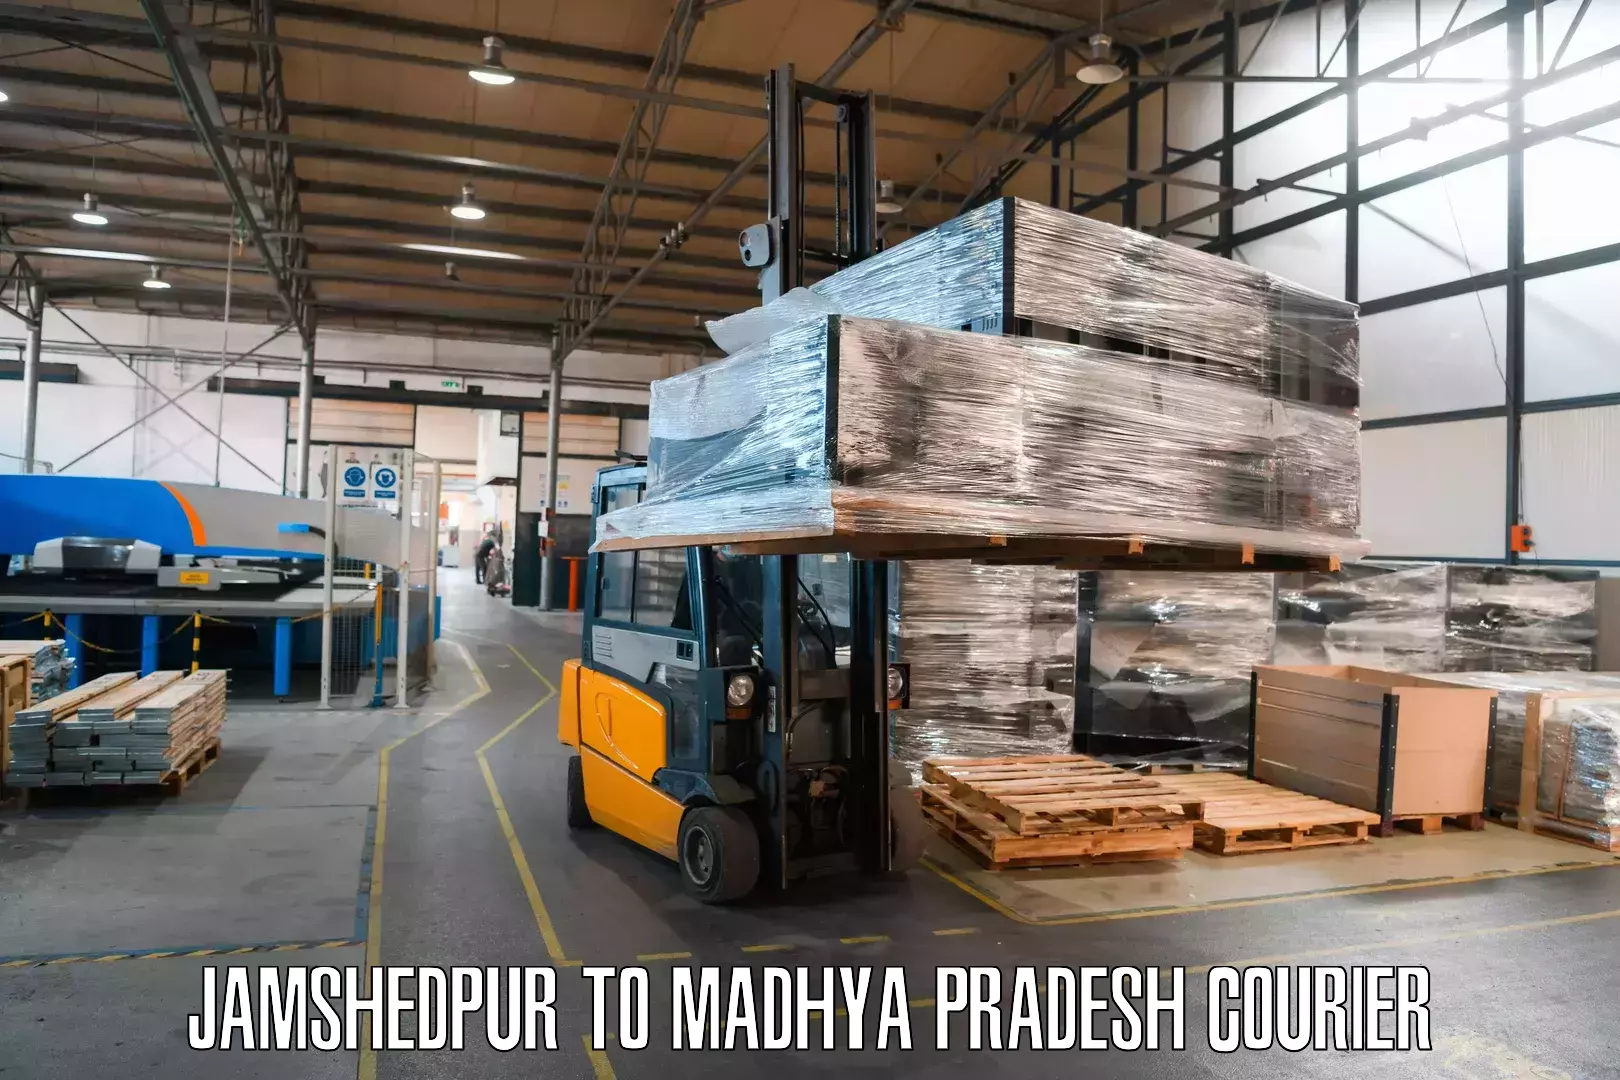 Subscription-based courier Jamshedpur to Amarwara